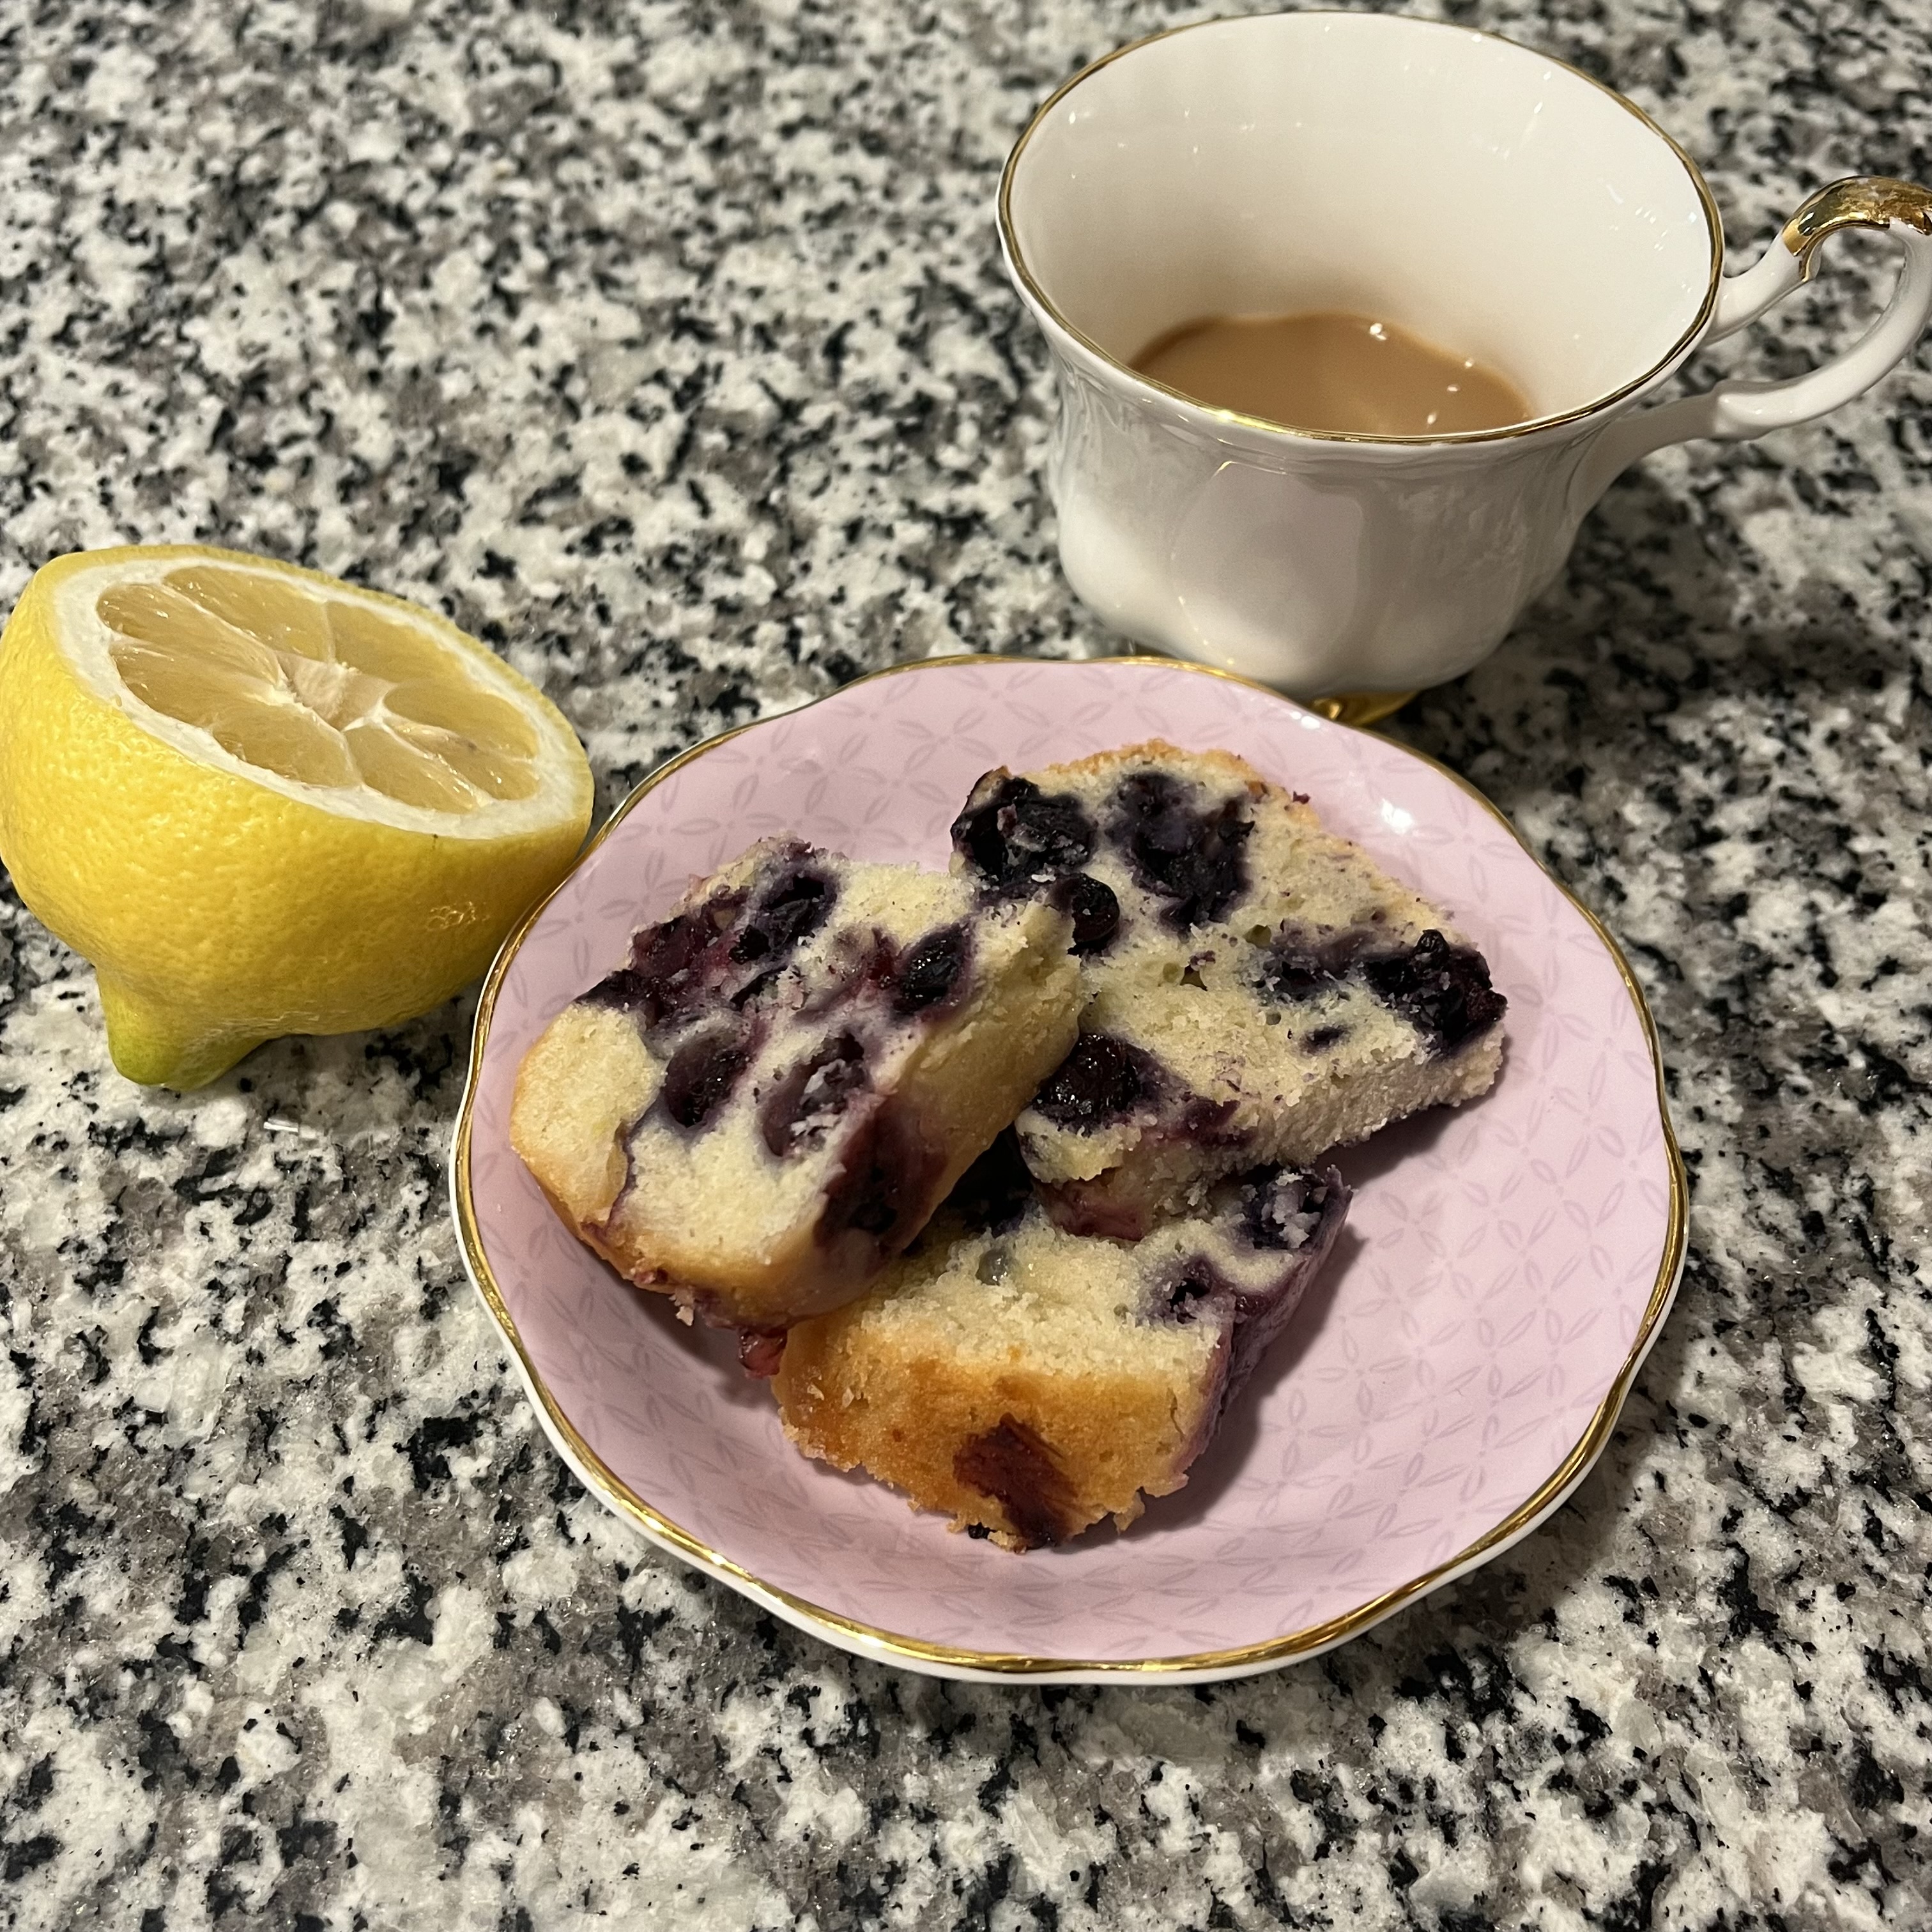 Indulge in Blueberry Lemon Bread, the Perfect Treat for Breakfast or Afternoon Tea.